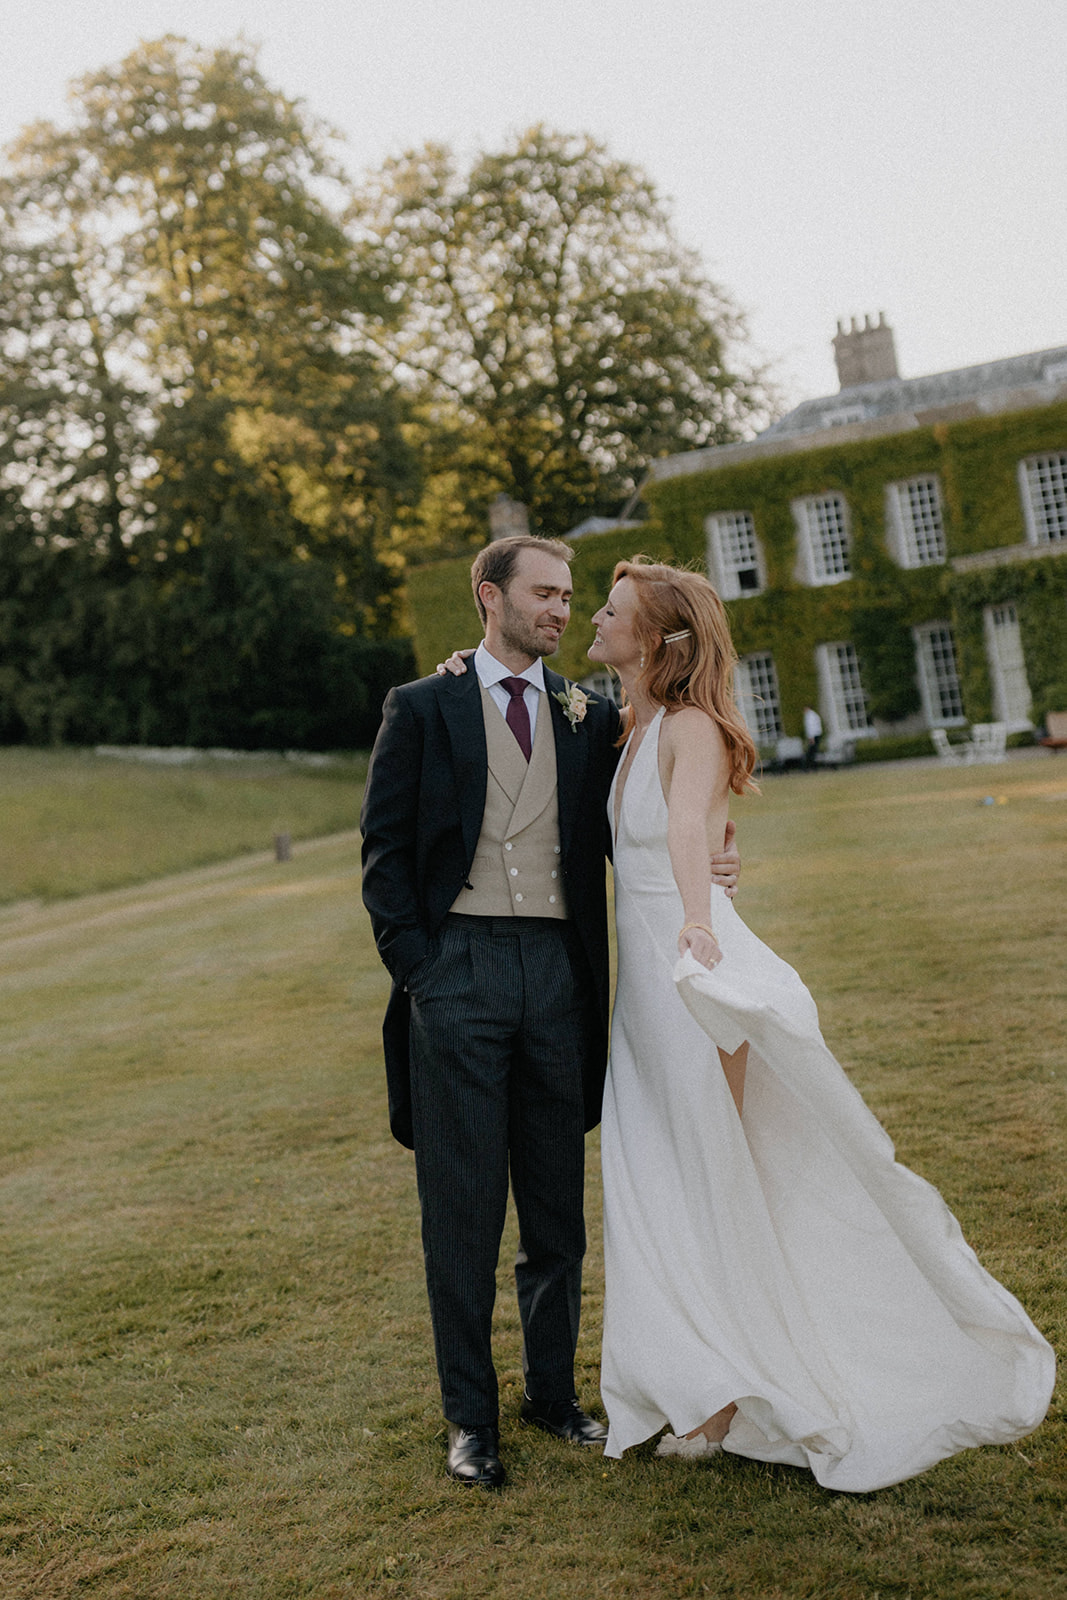 Stylish wedding at Findon Place in West Sussex